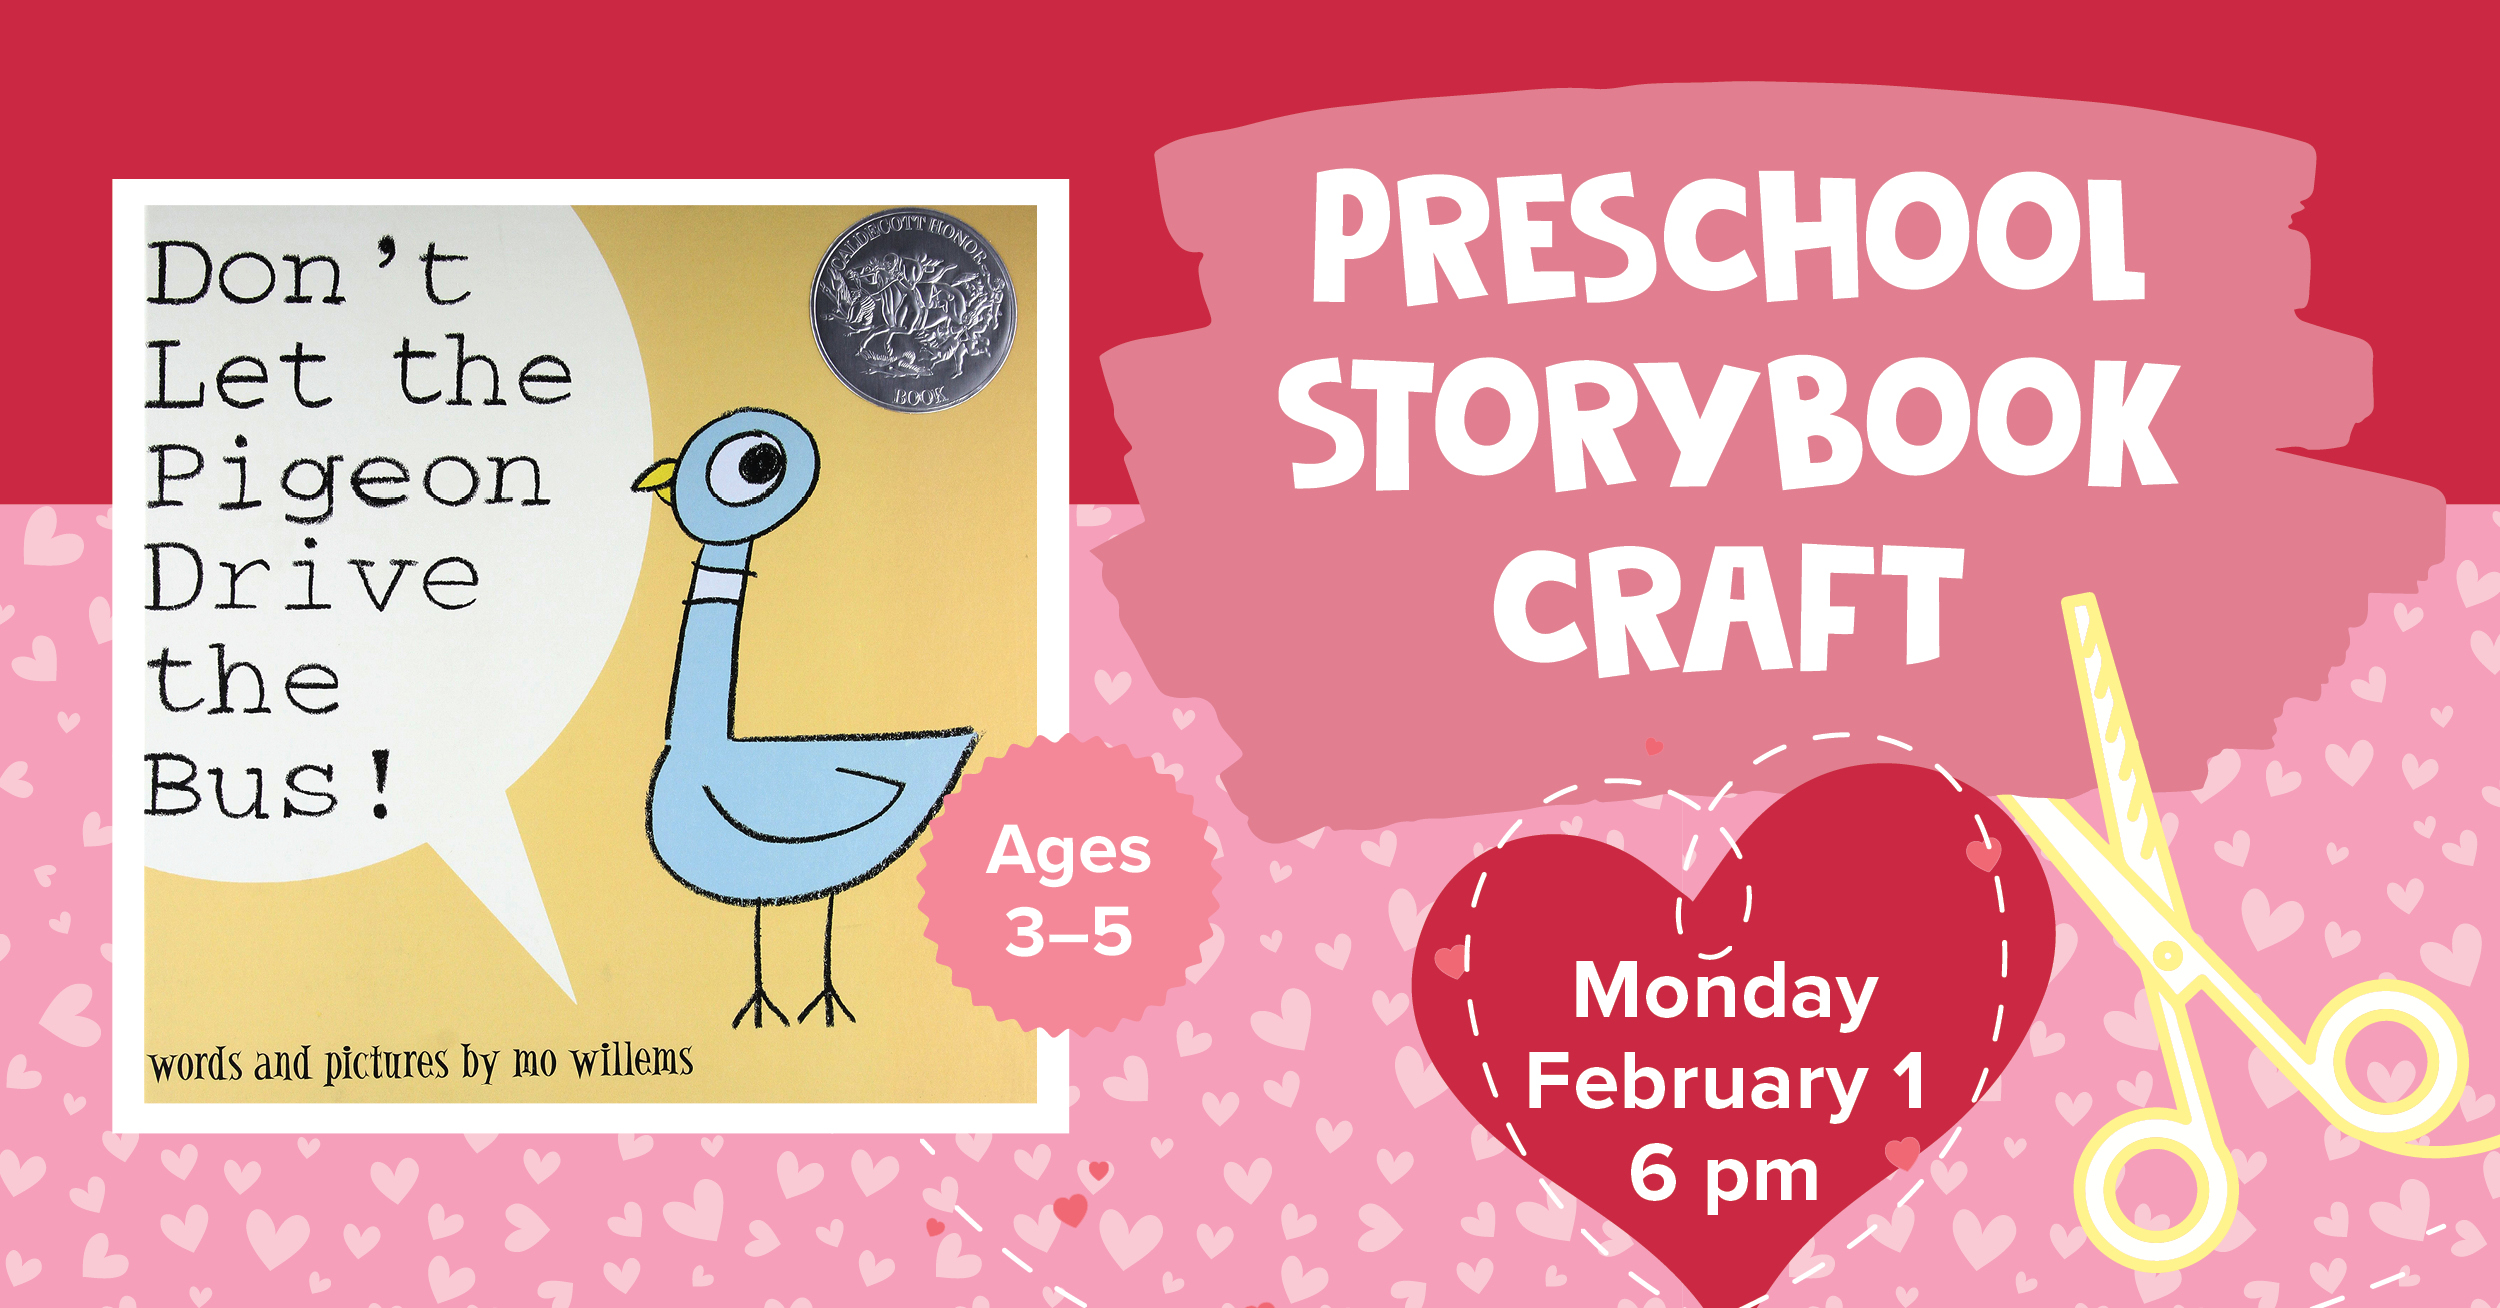 Book Cover: Don't Let the Pidgeon Drive the Bus by Mo Willems; Preschool Storybook Craft; Monday February 1 6pm; Ages 3 to 5